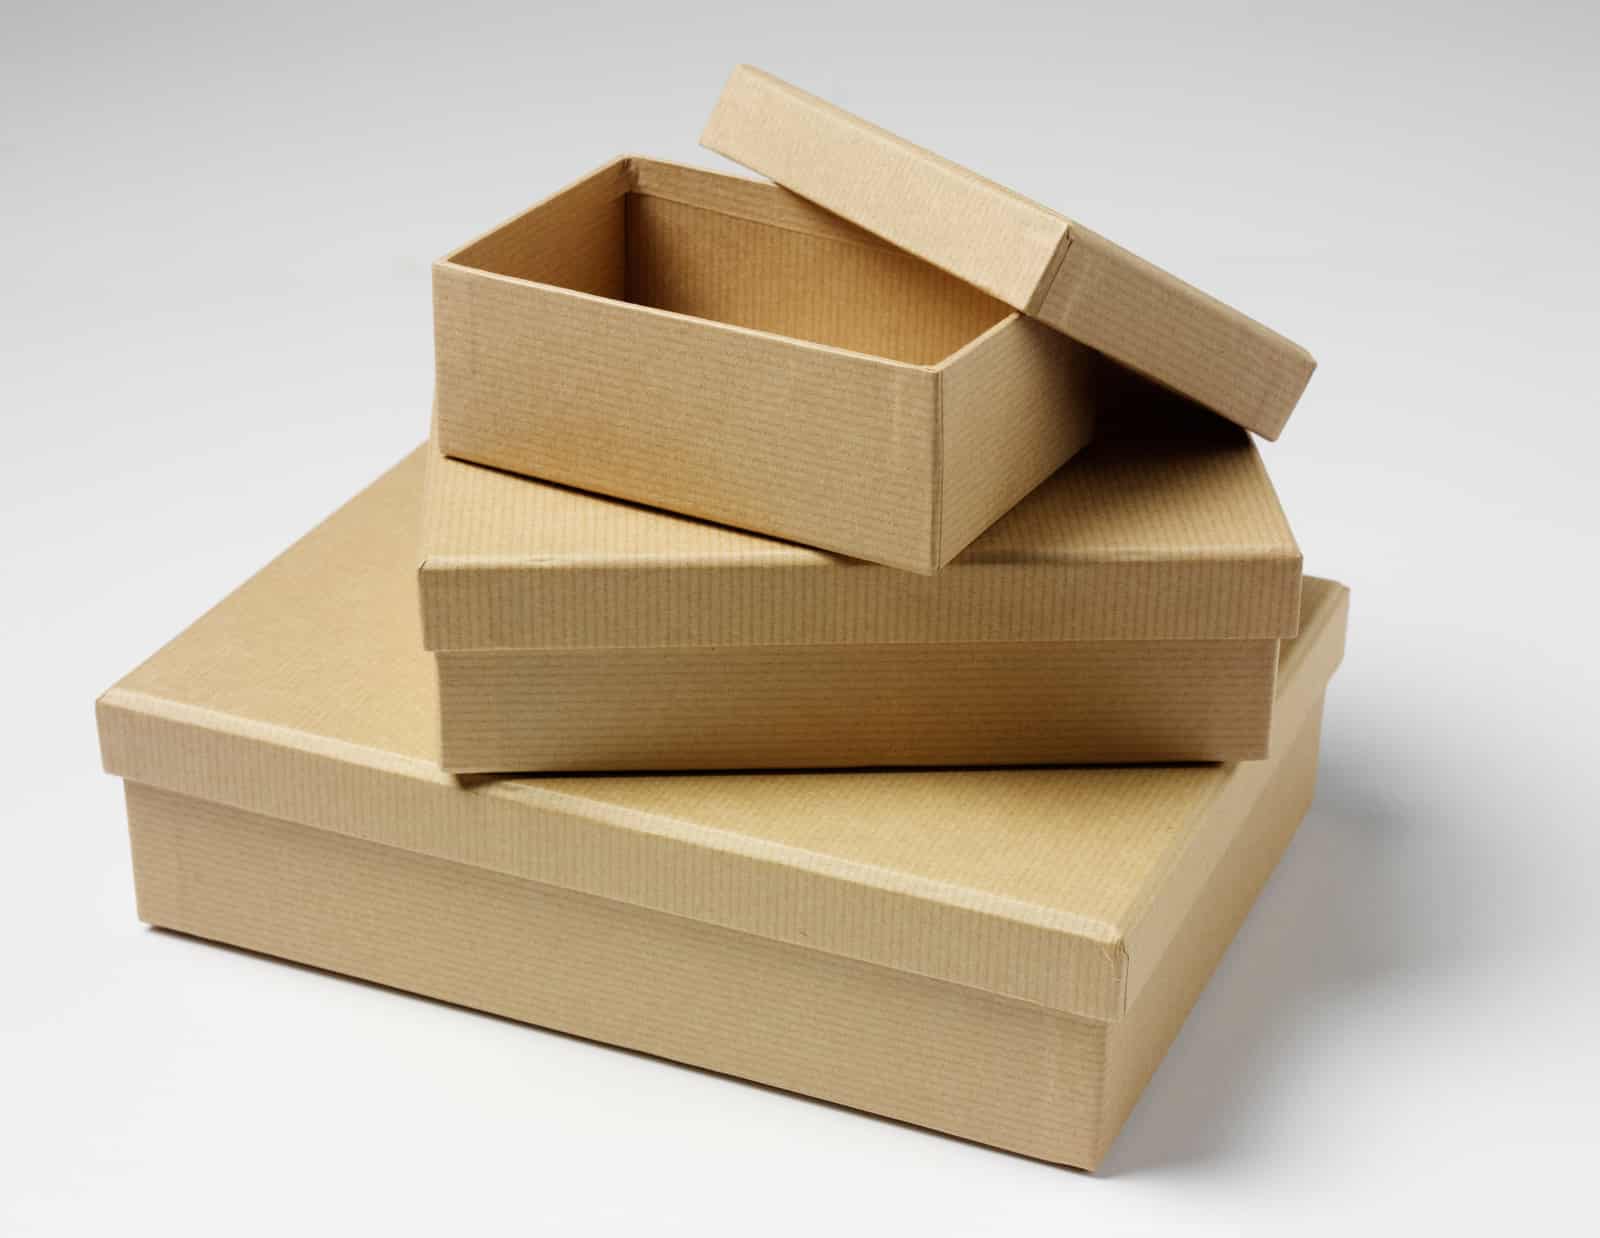 Brown boxes in a pile, with the top one open.